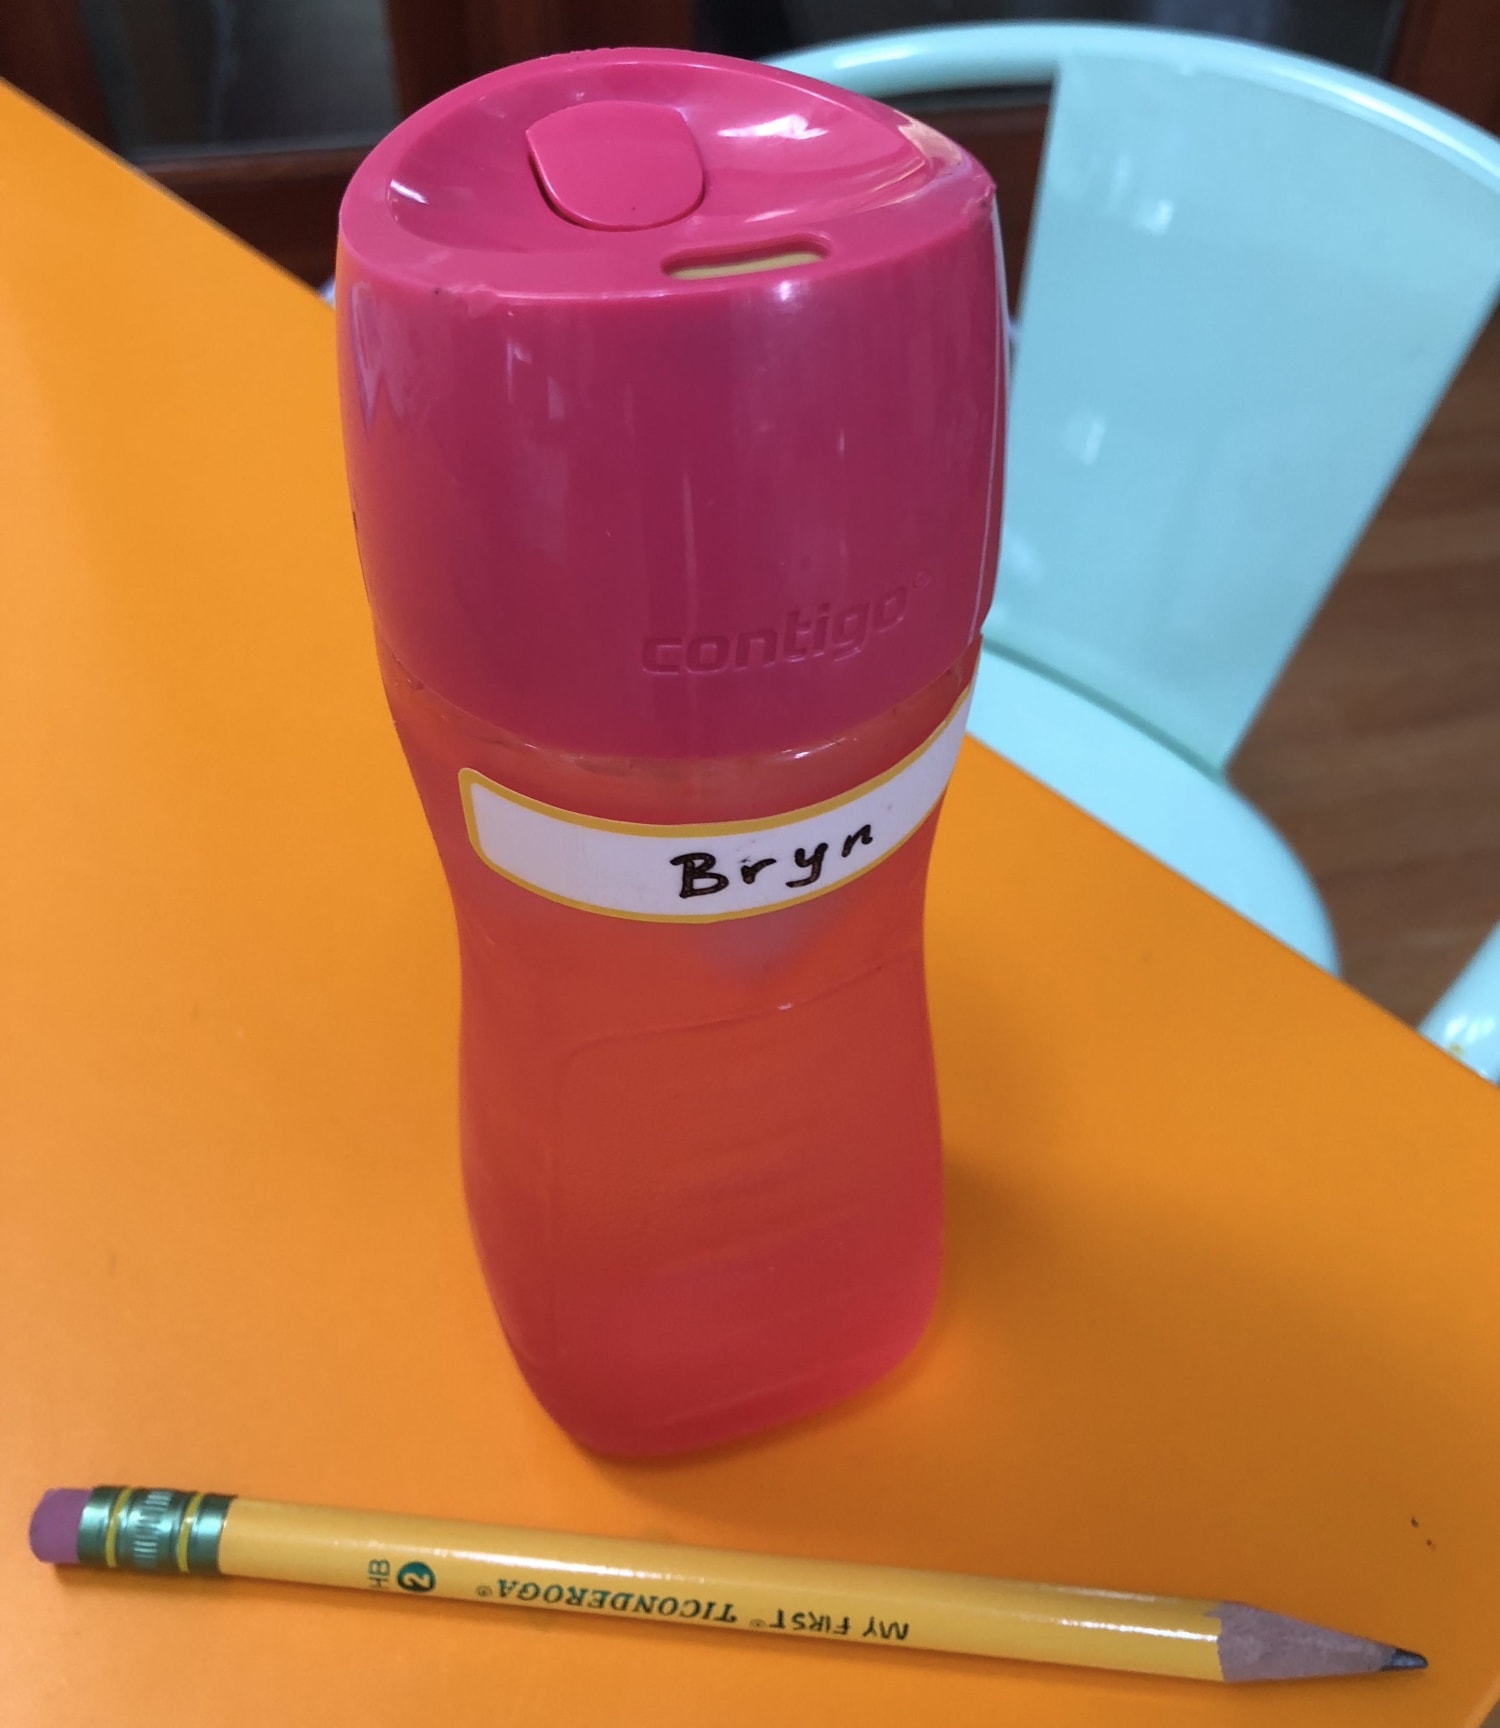 Guide to Dishwasher Safe Water Bottles - Dyer Appliance Repair Academy